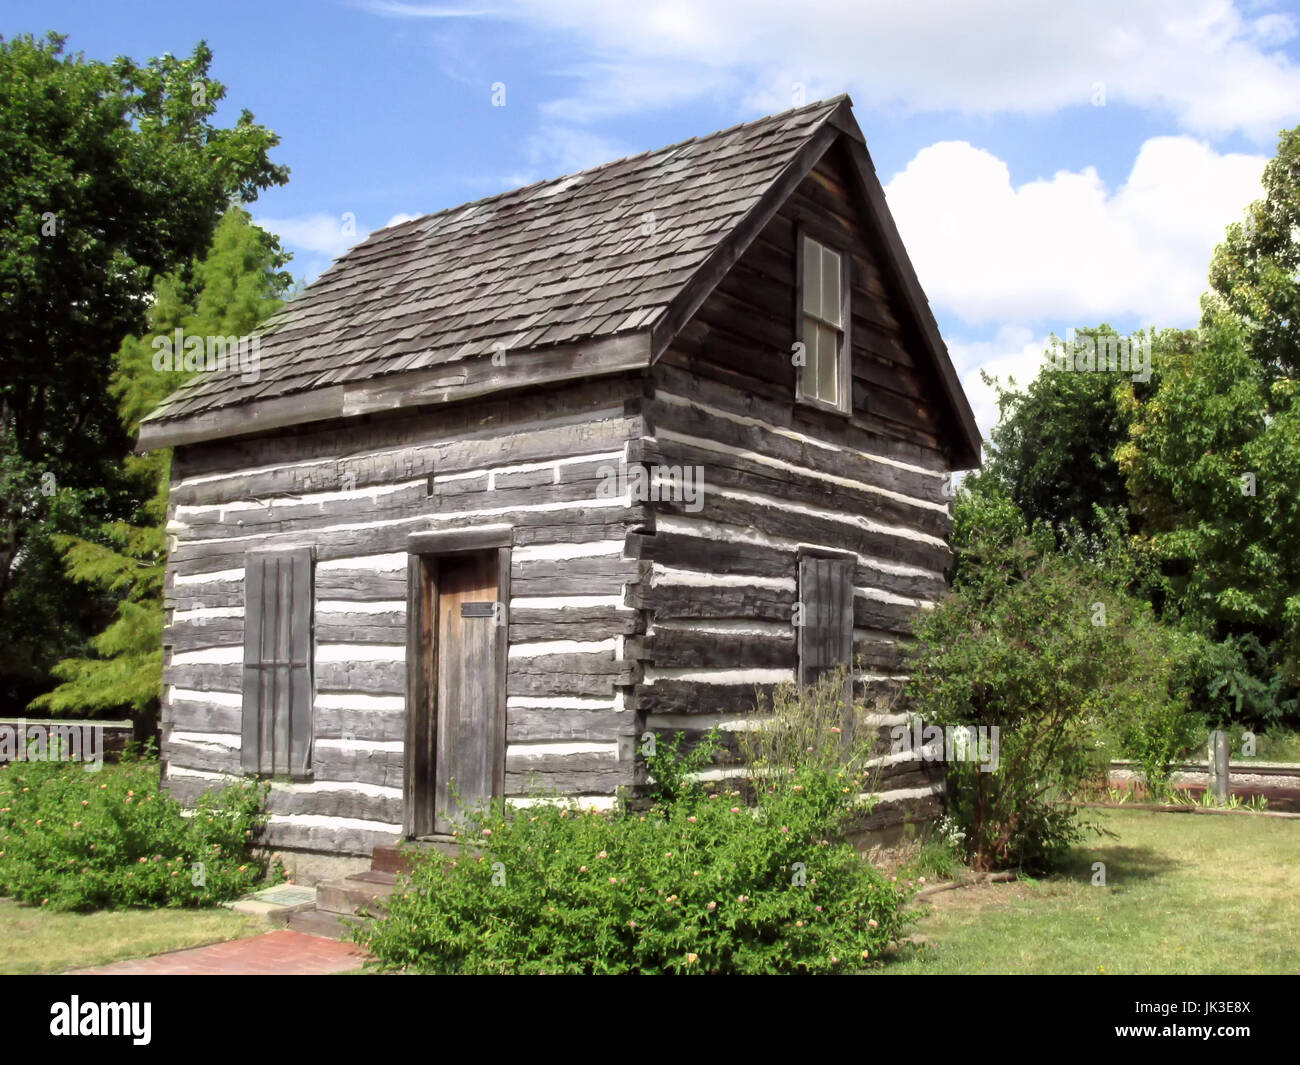 The Beard Cabin was the first house built in Shawnee Oklahoma in 1892. Stock Photo